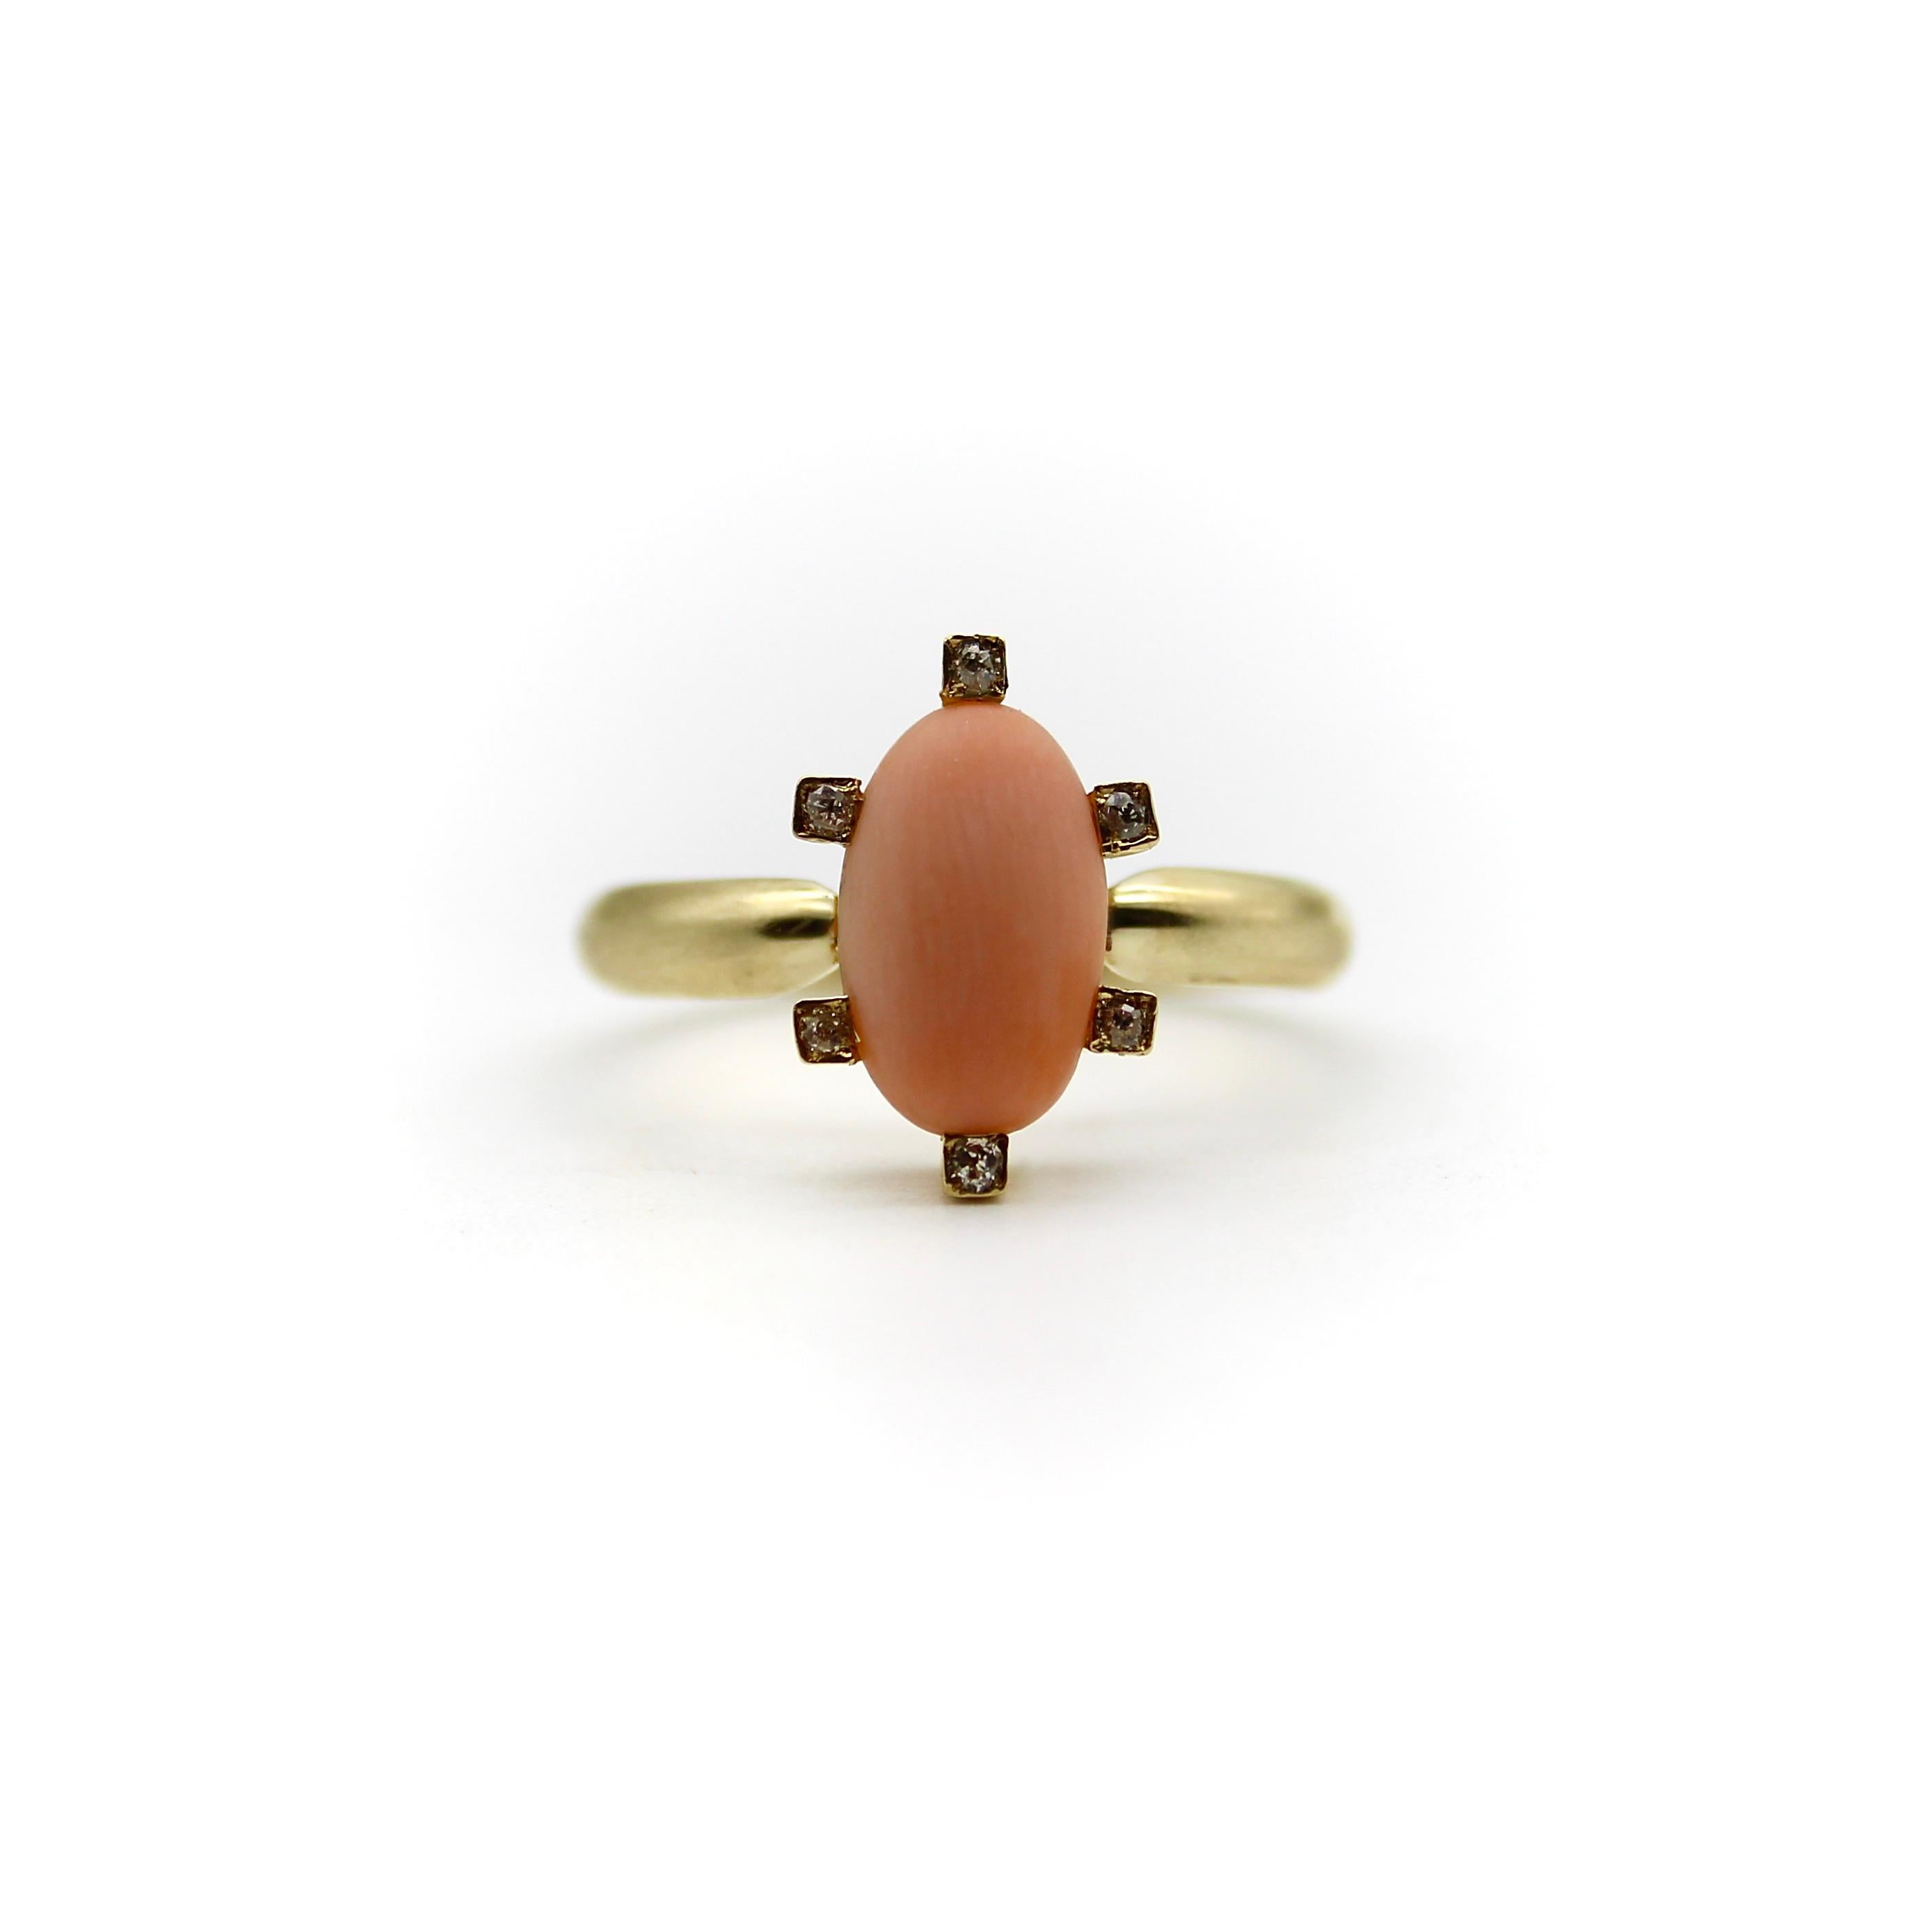 This pale pink coral cabochon is elegant and feminine, circa the Victorian era, and set on a 14k gold ring. The coral has a beautiful matte surface with delicate wood-like graining. The cabochon is surrounded by six Old Mine Cut diamonds, sweetly